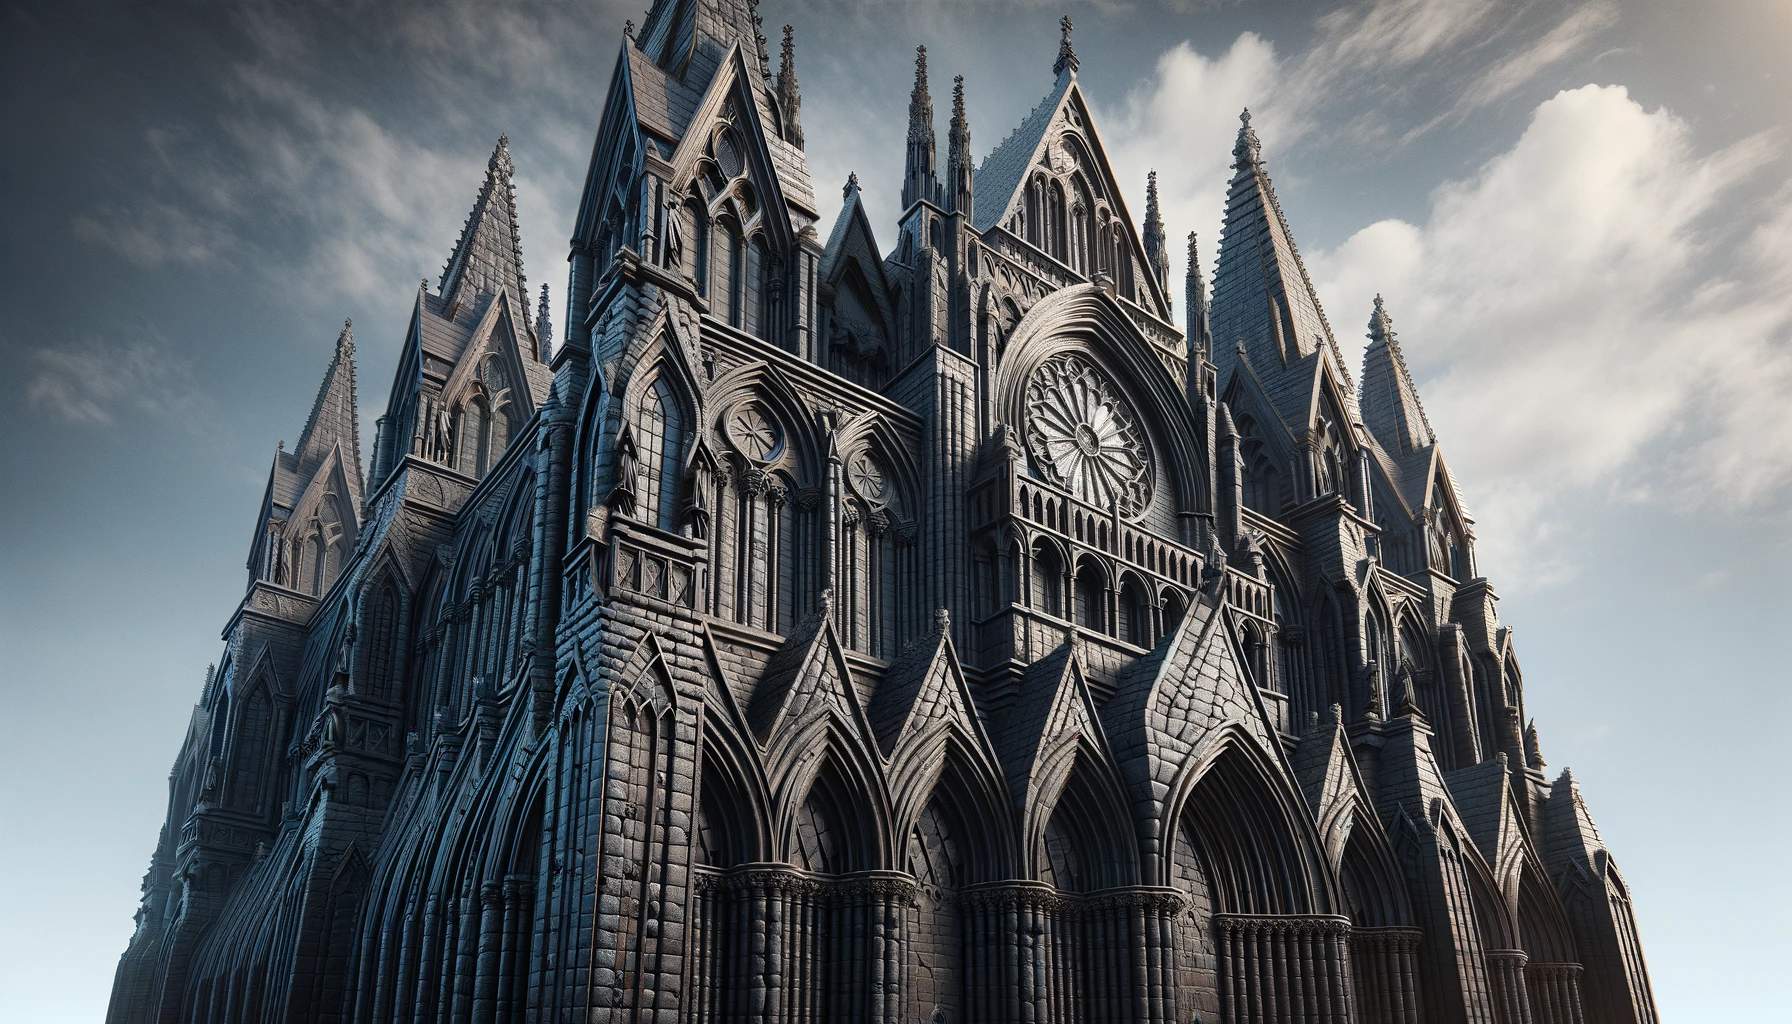 Where Can You Find A Cathedral Made Entirely From Volcanic Rock?